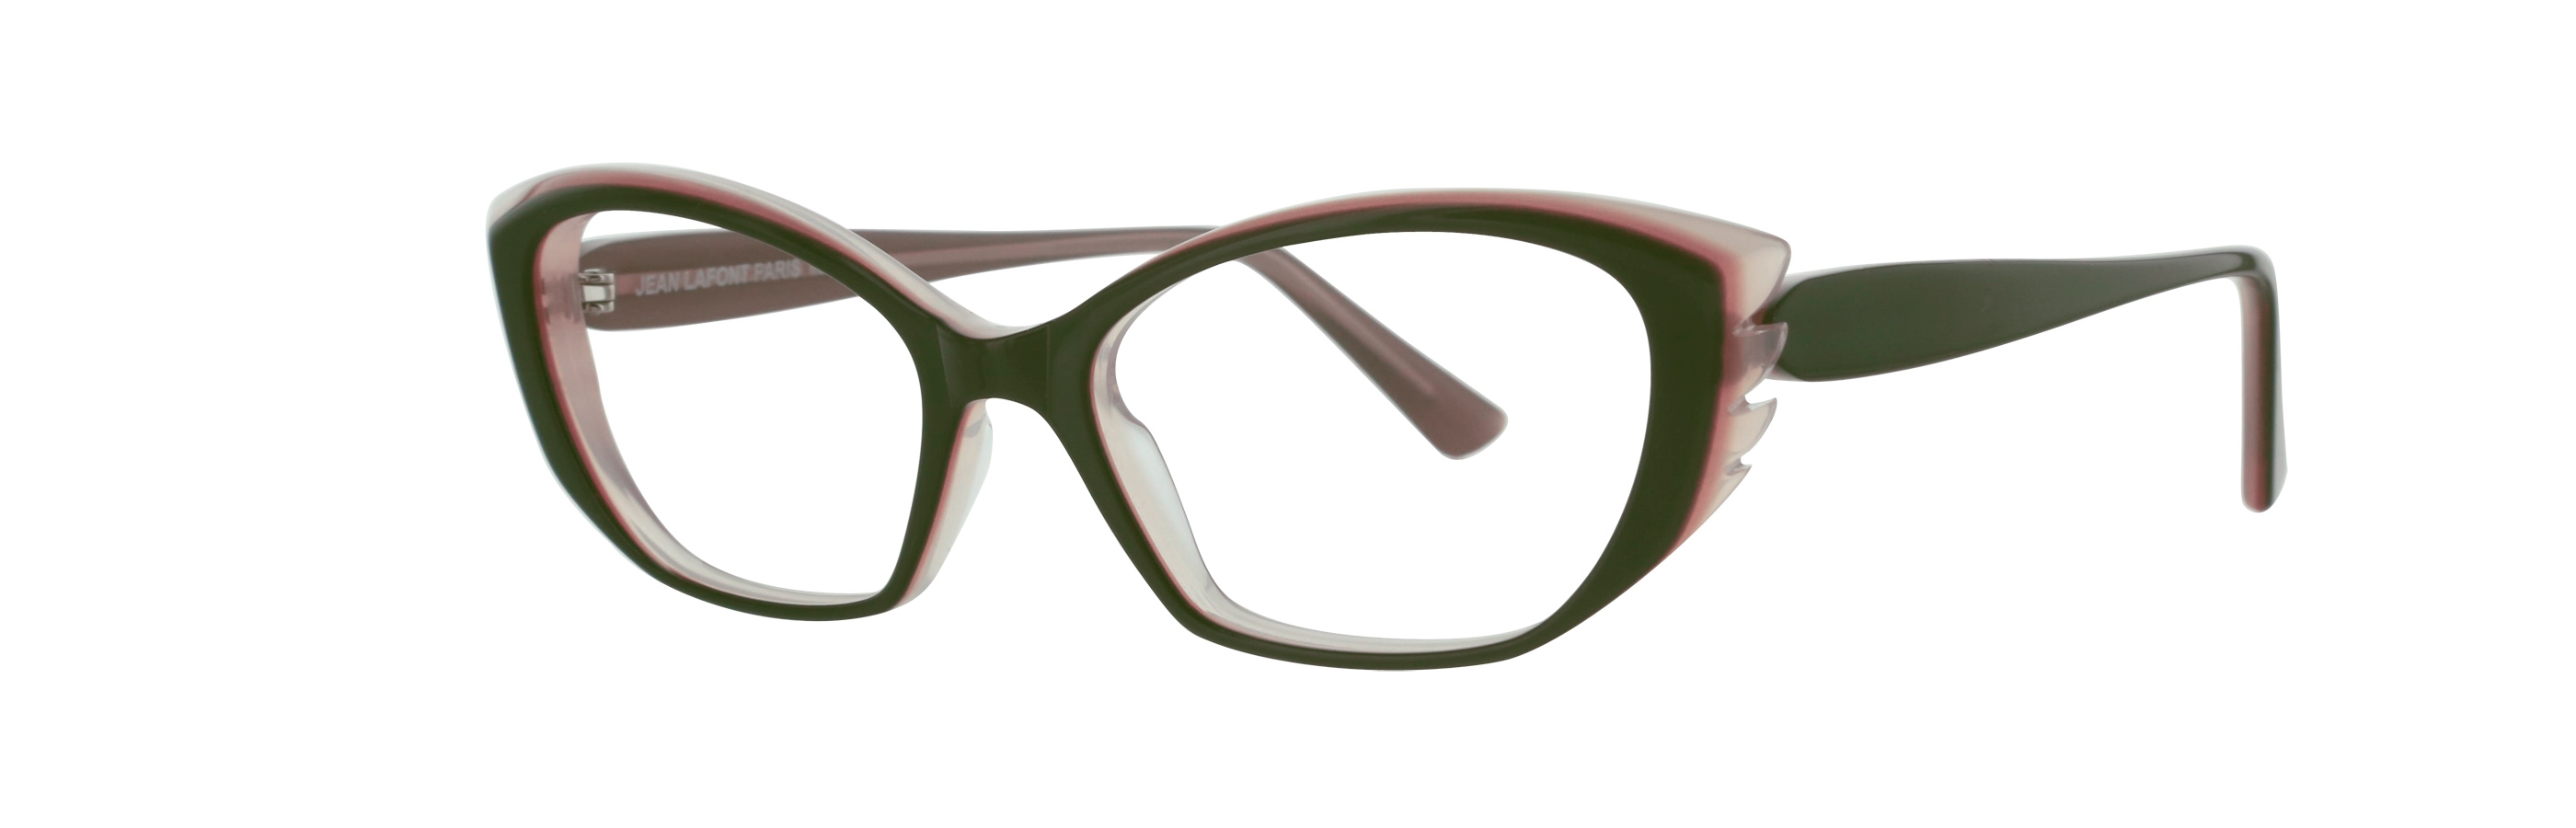 LAFONT FRENCHY 4047